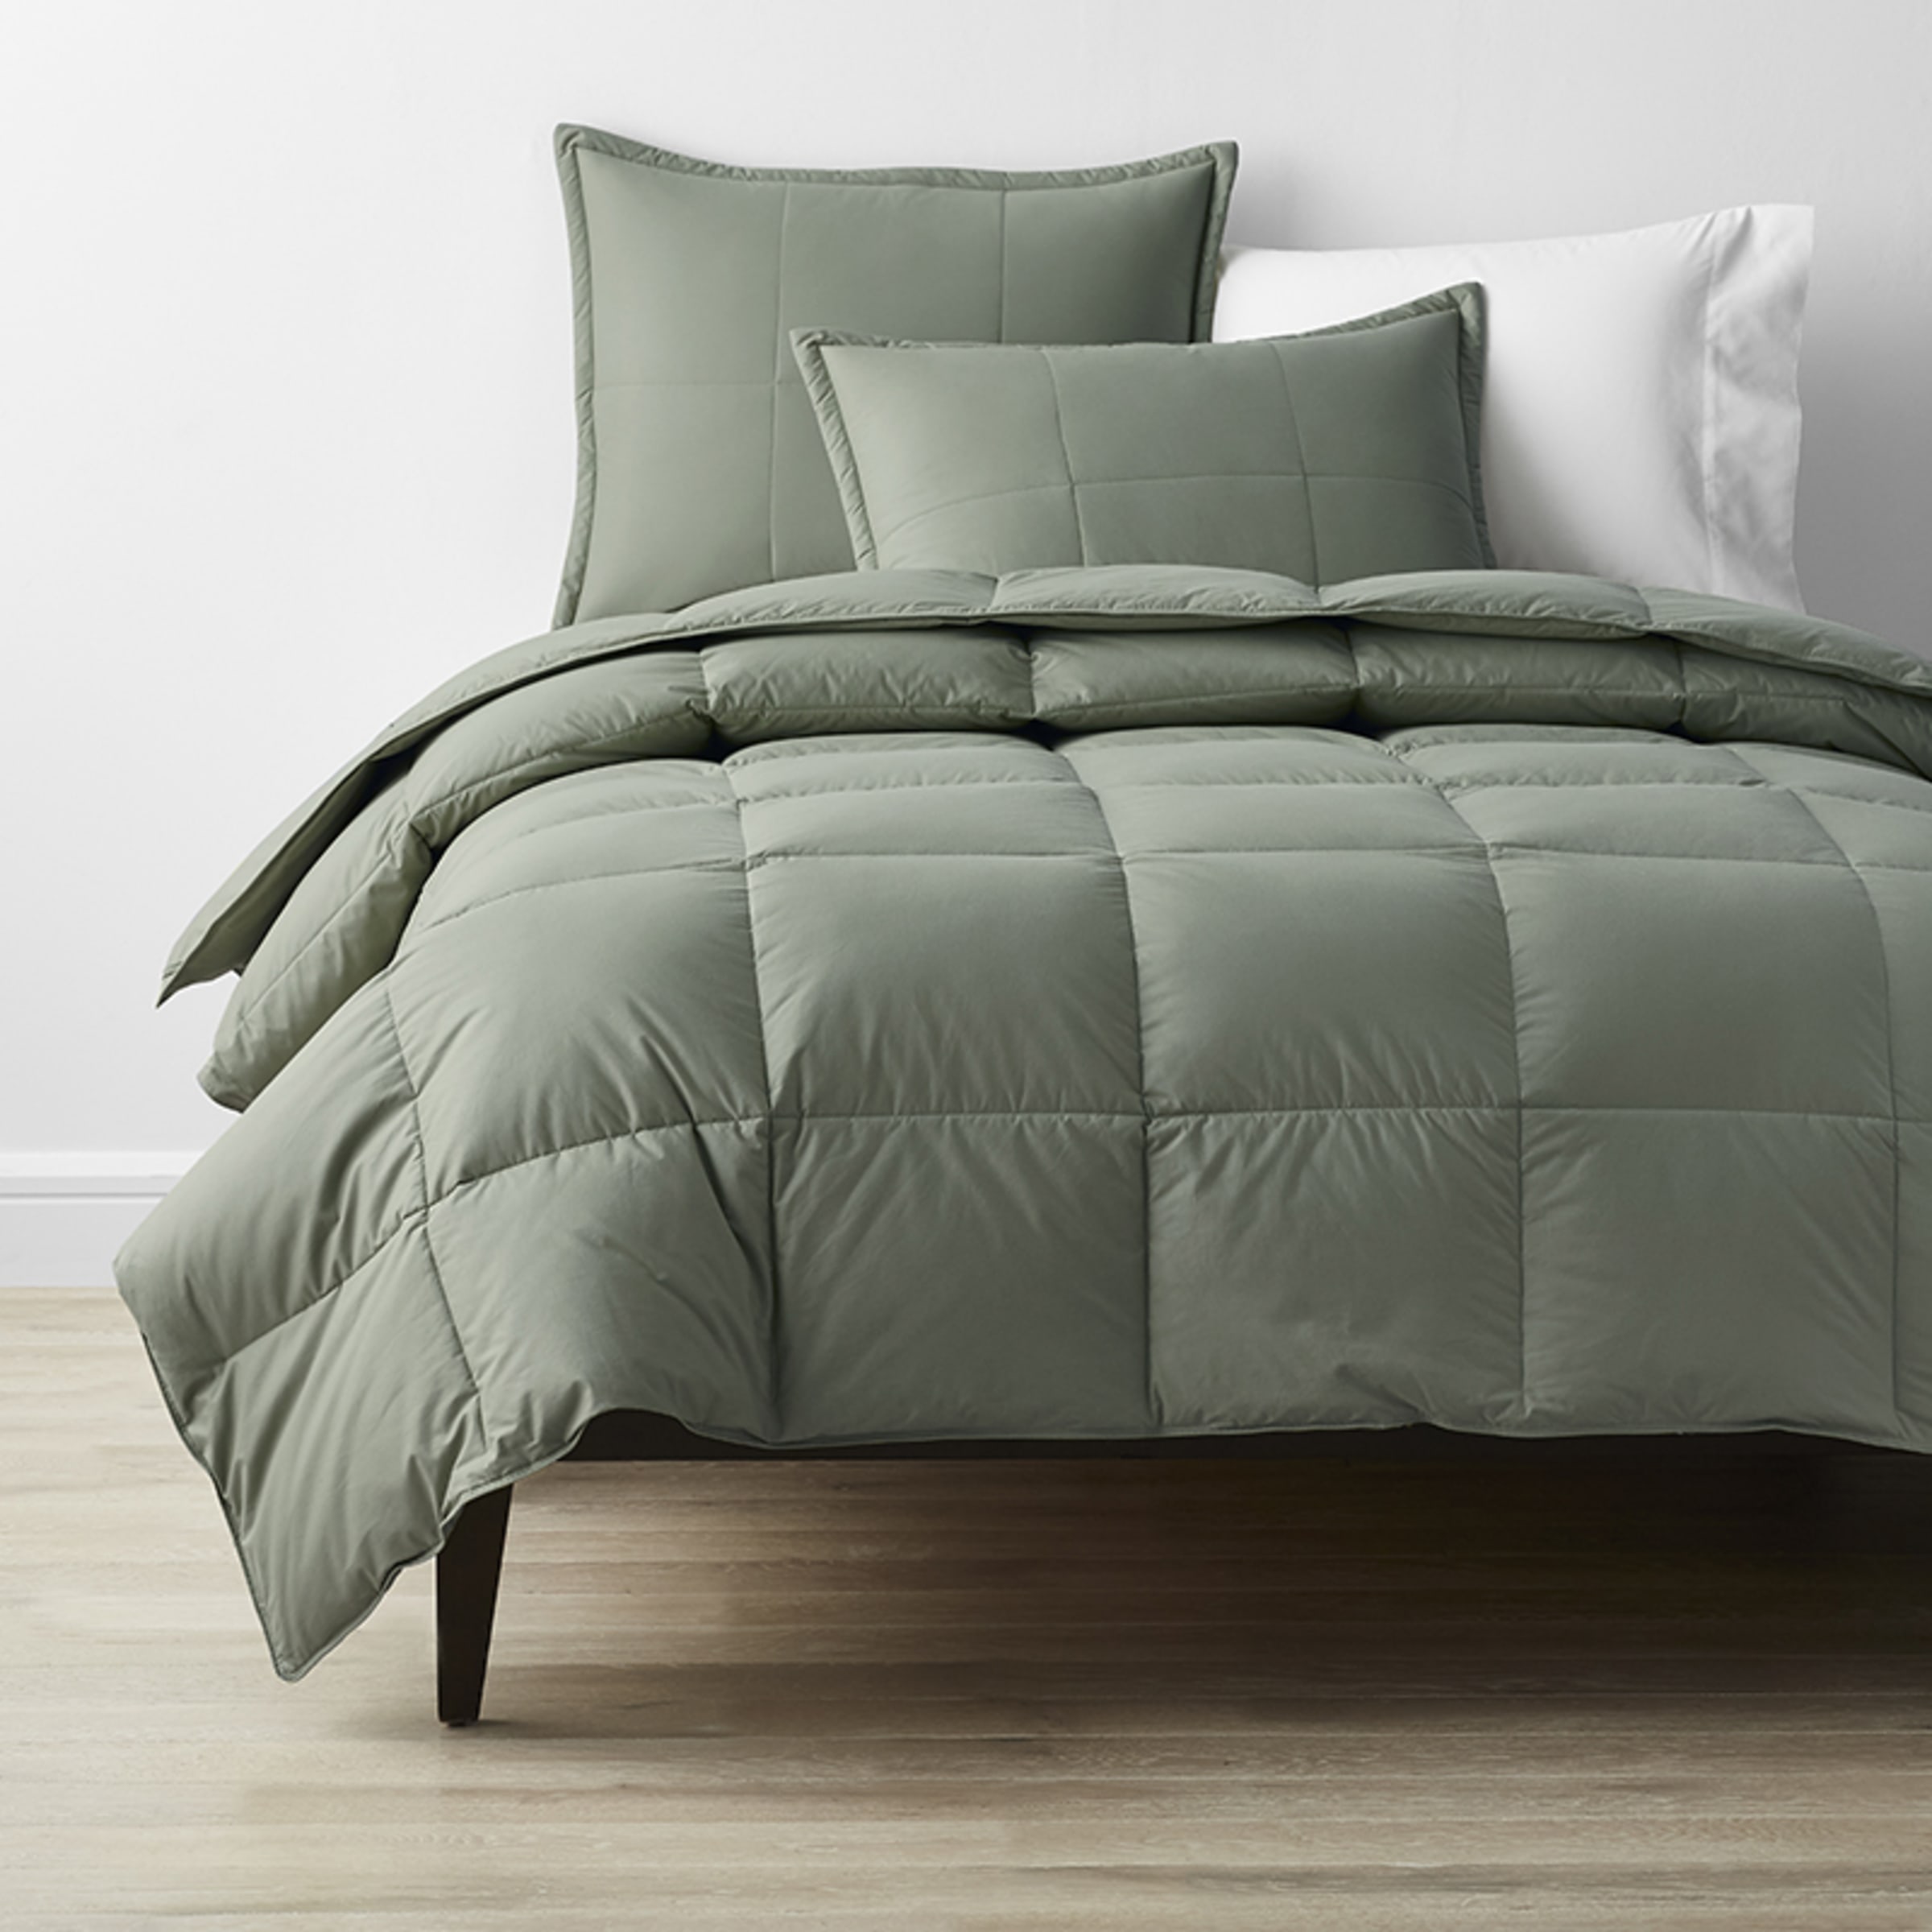 LaCrosse™ Down Comforter | The Company Store